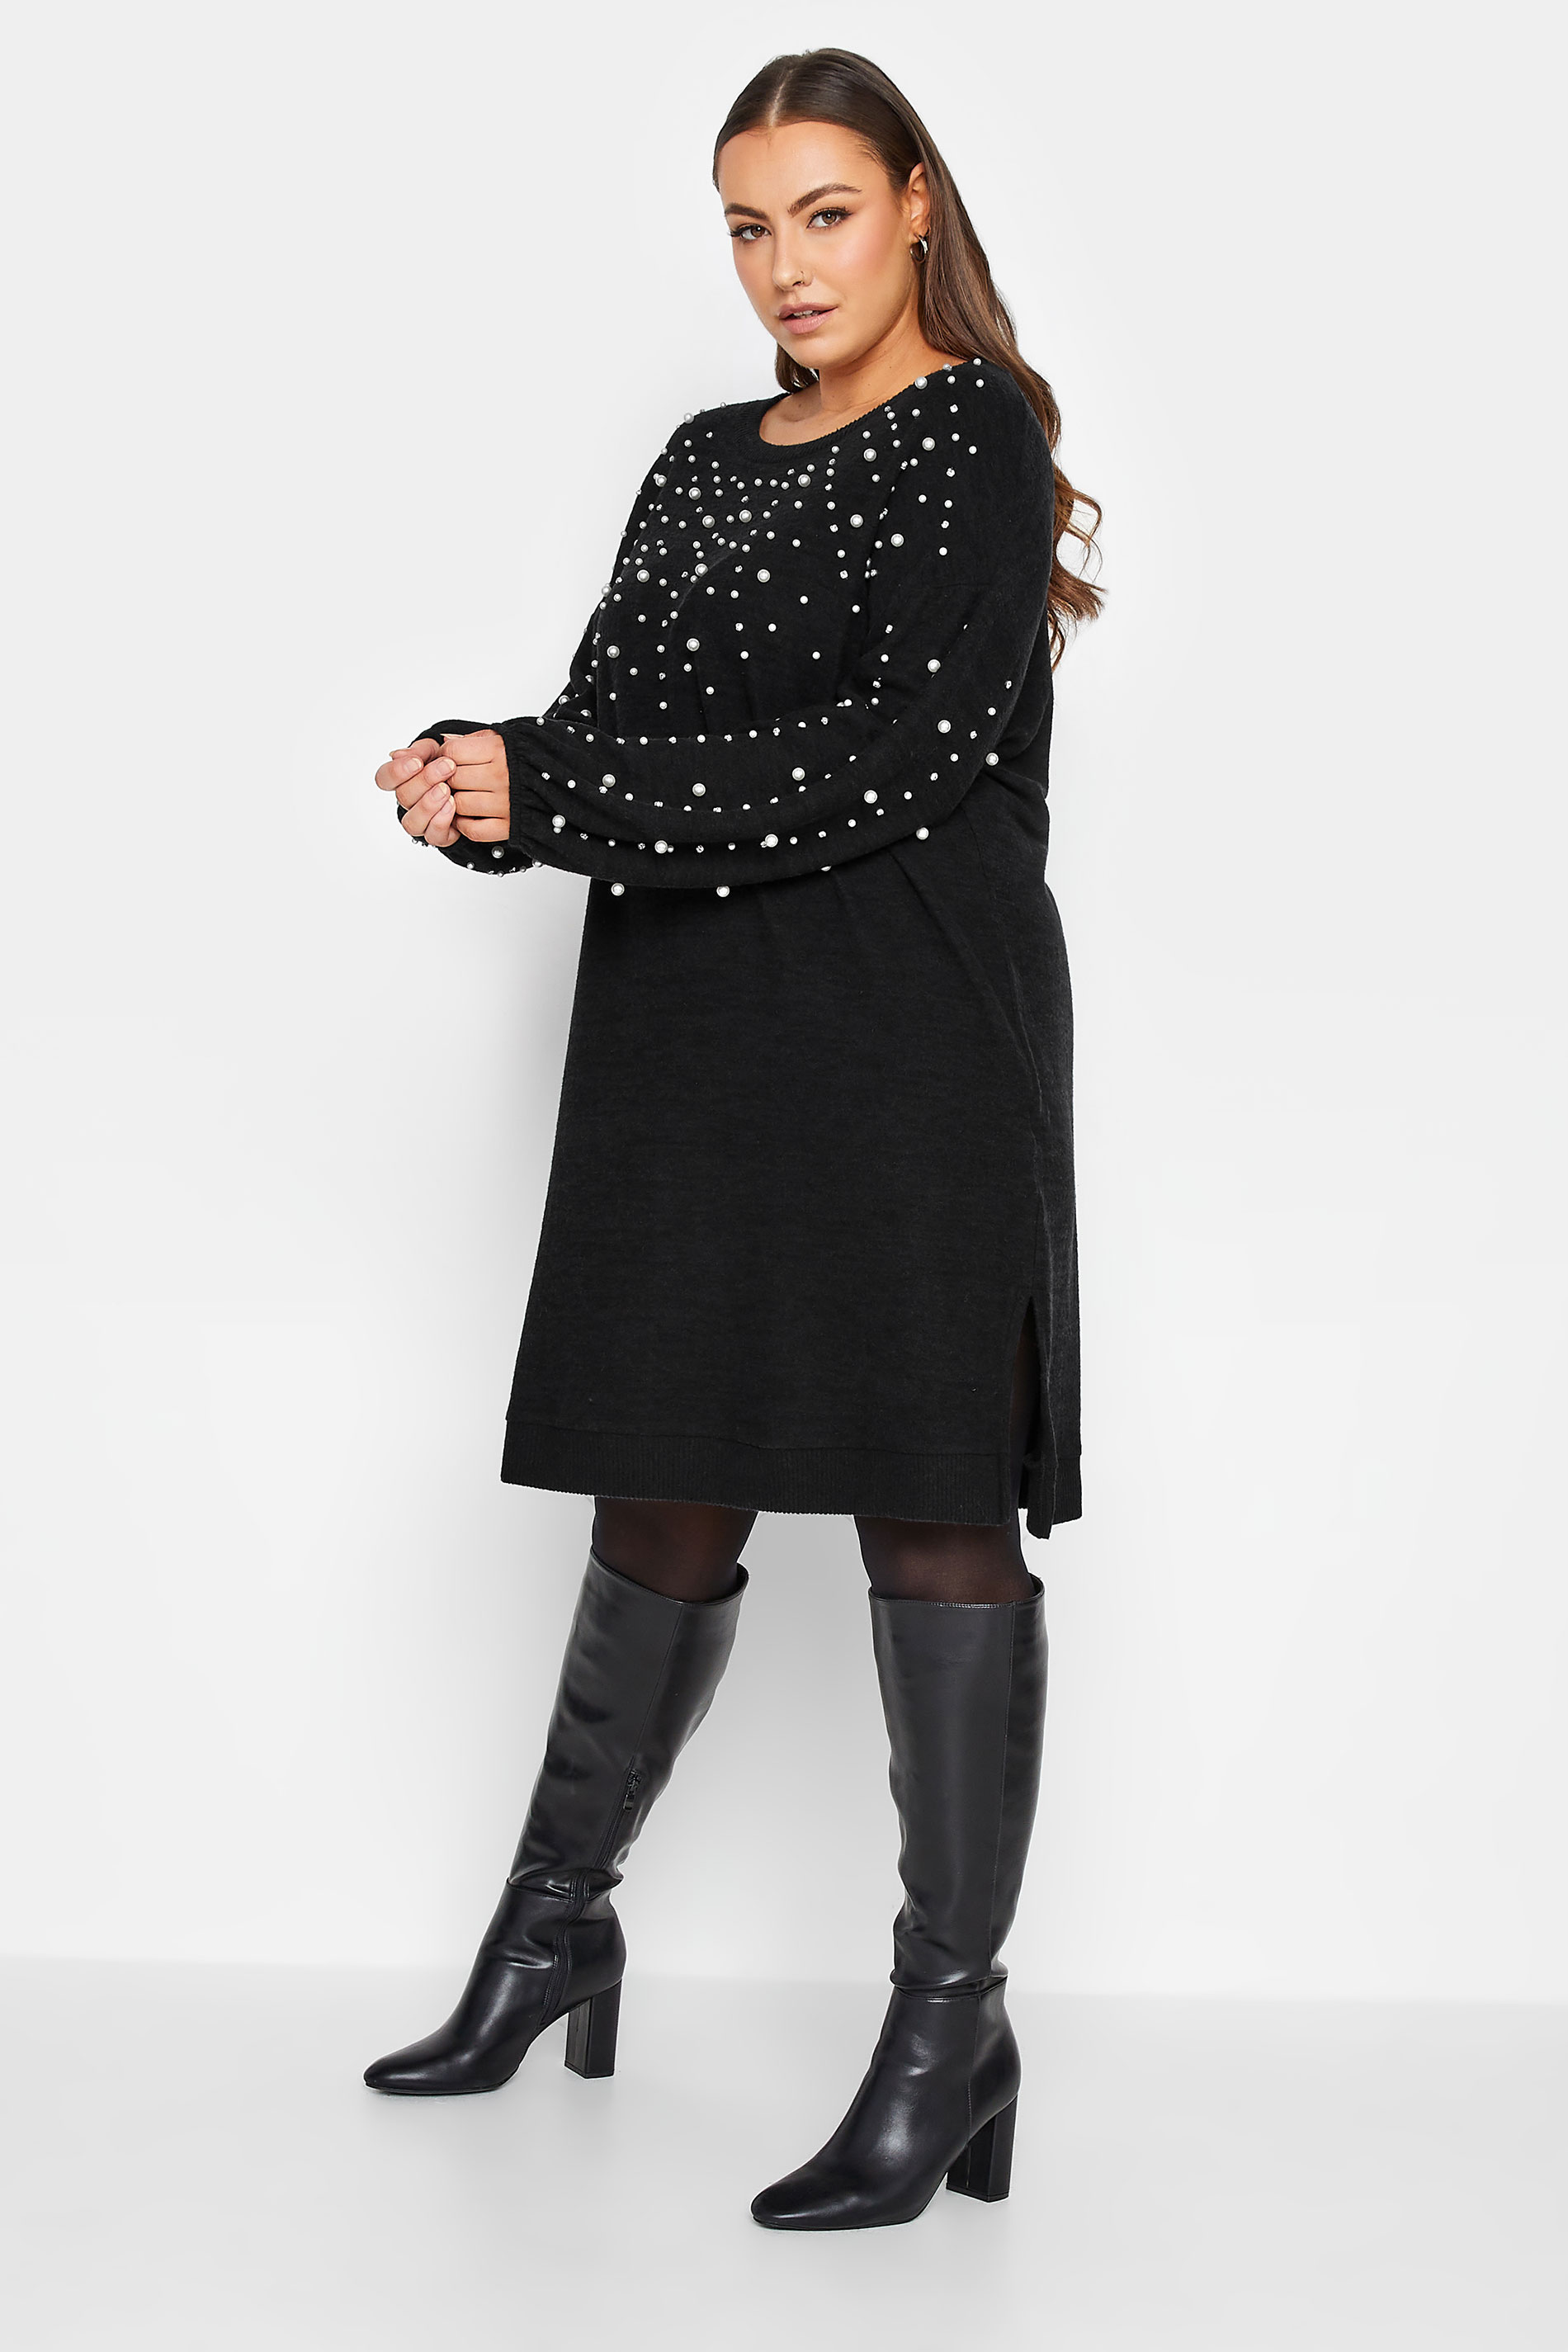 YOURS LUXURY Plus Size Black Soft Touch Embellished Jumper Dress | Yours Clothing 2